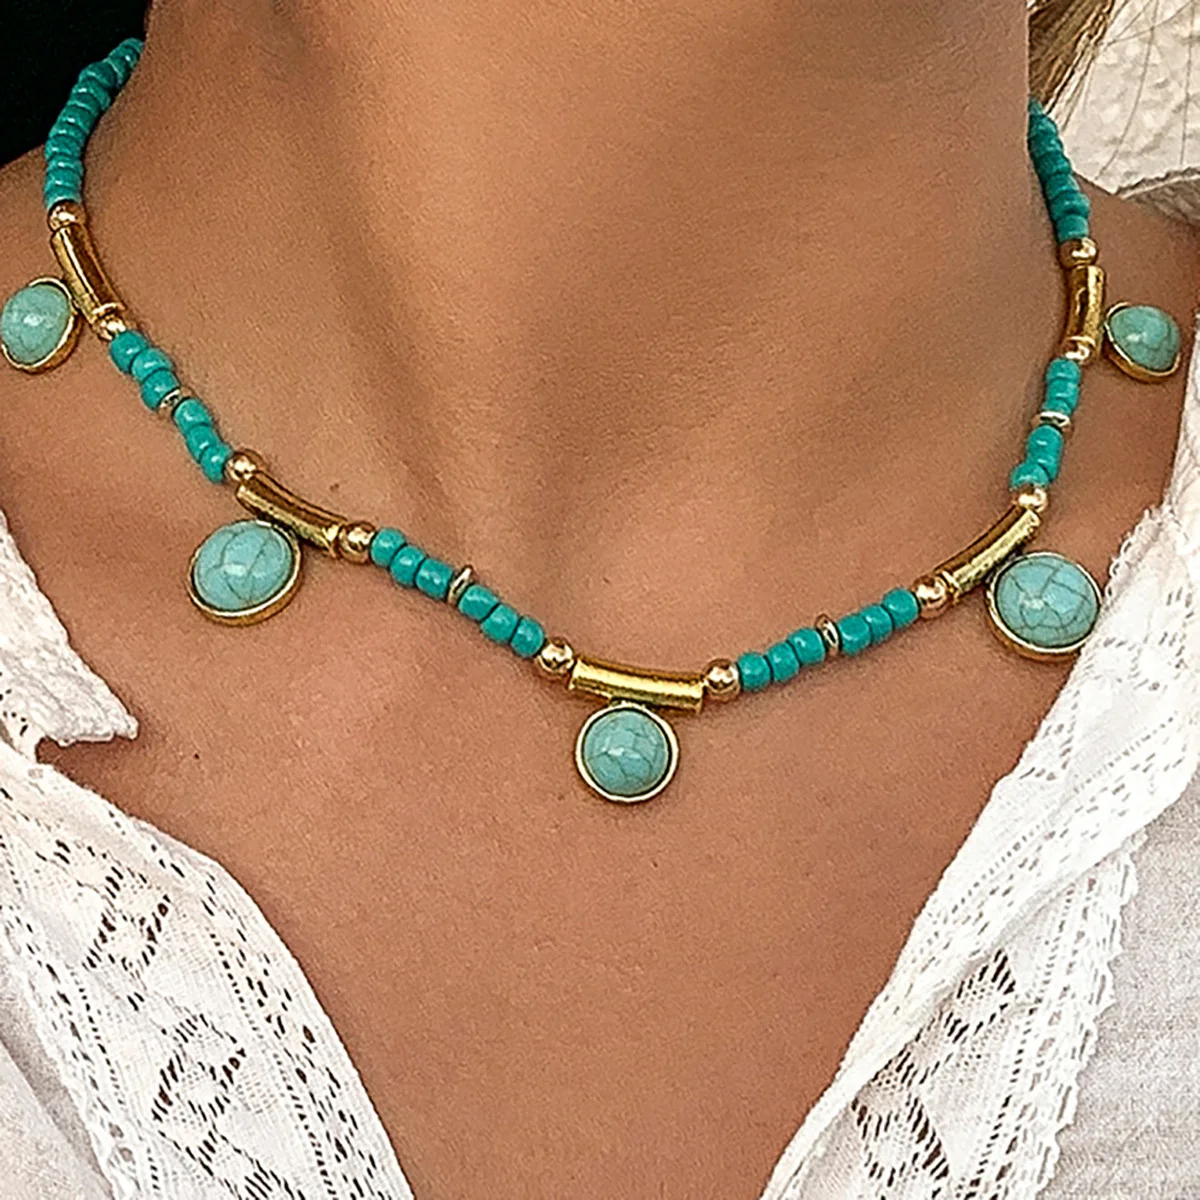 

TU-GEM Vintage Ethnic Style Turquoise Pendent Necklace Bohemian Seed Bead Necklace Gold Adjustable Link Chain Necklace for Women